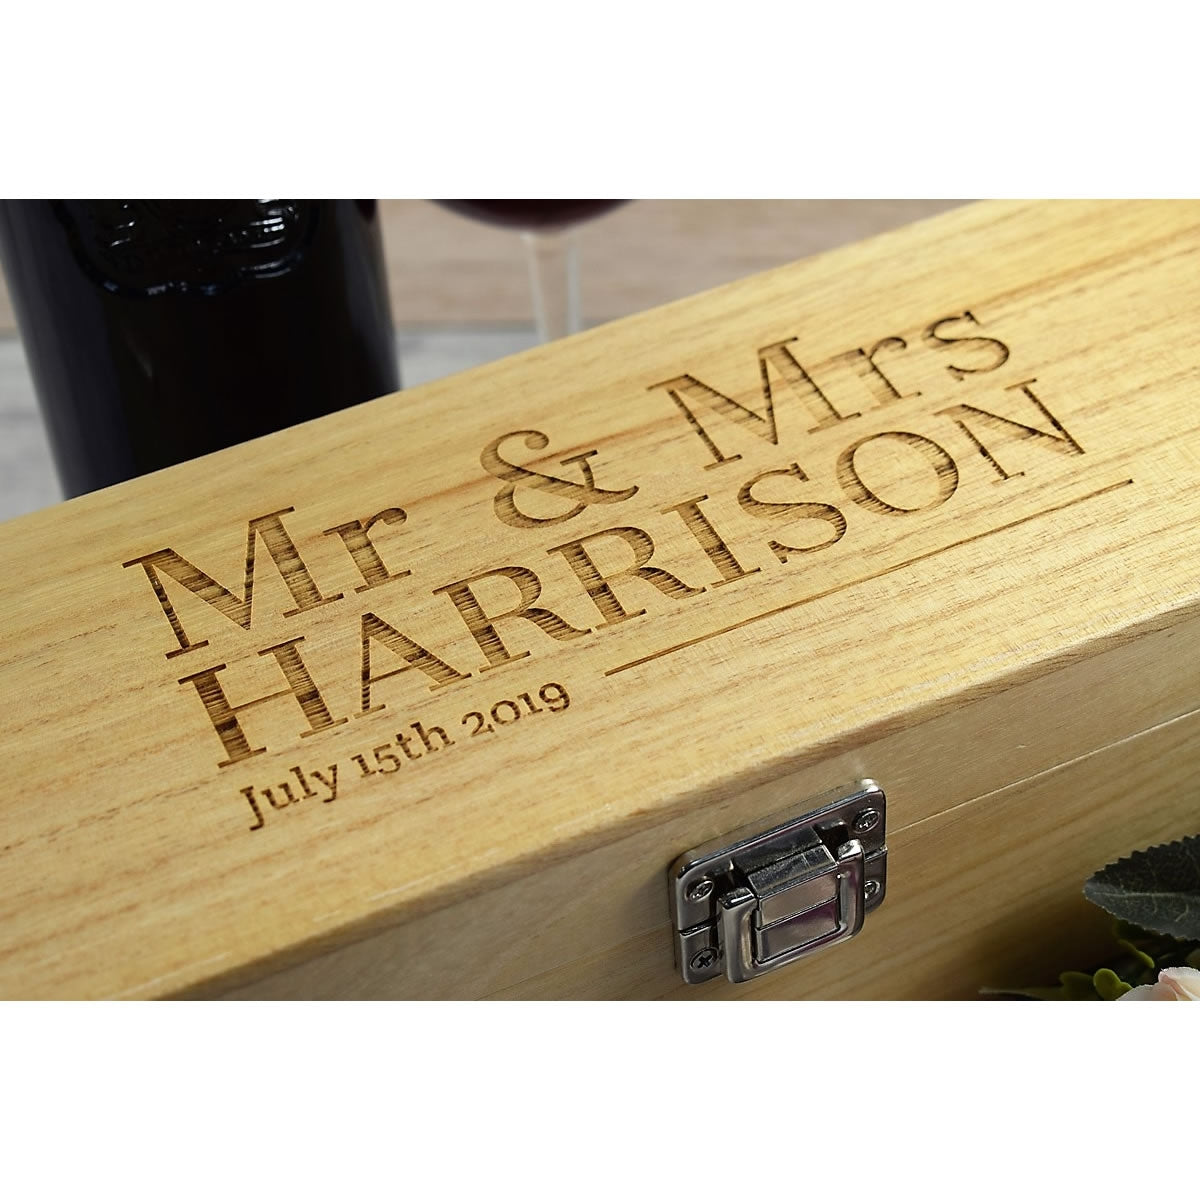 Personalised Wooden Wine Box - Mr & Mrs Couples Wedding Gift